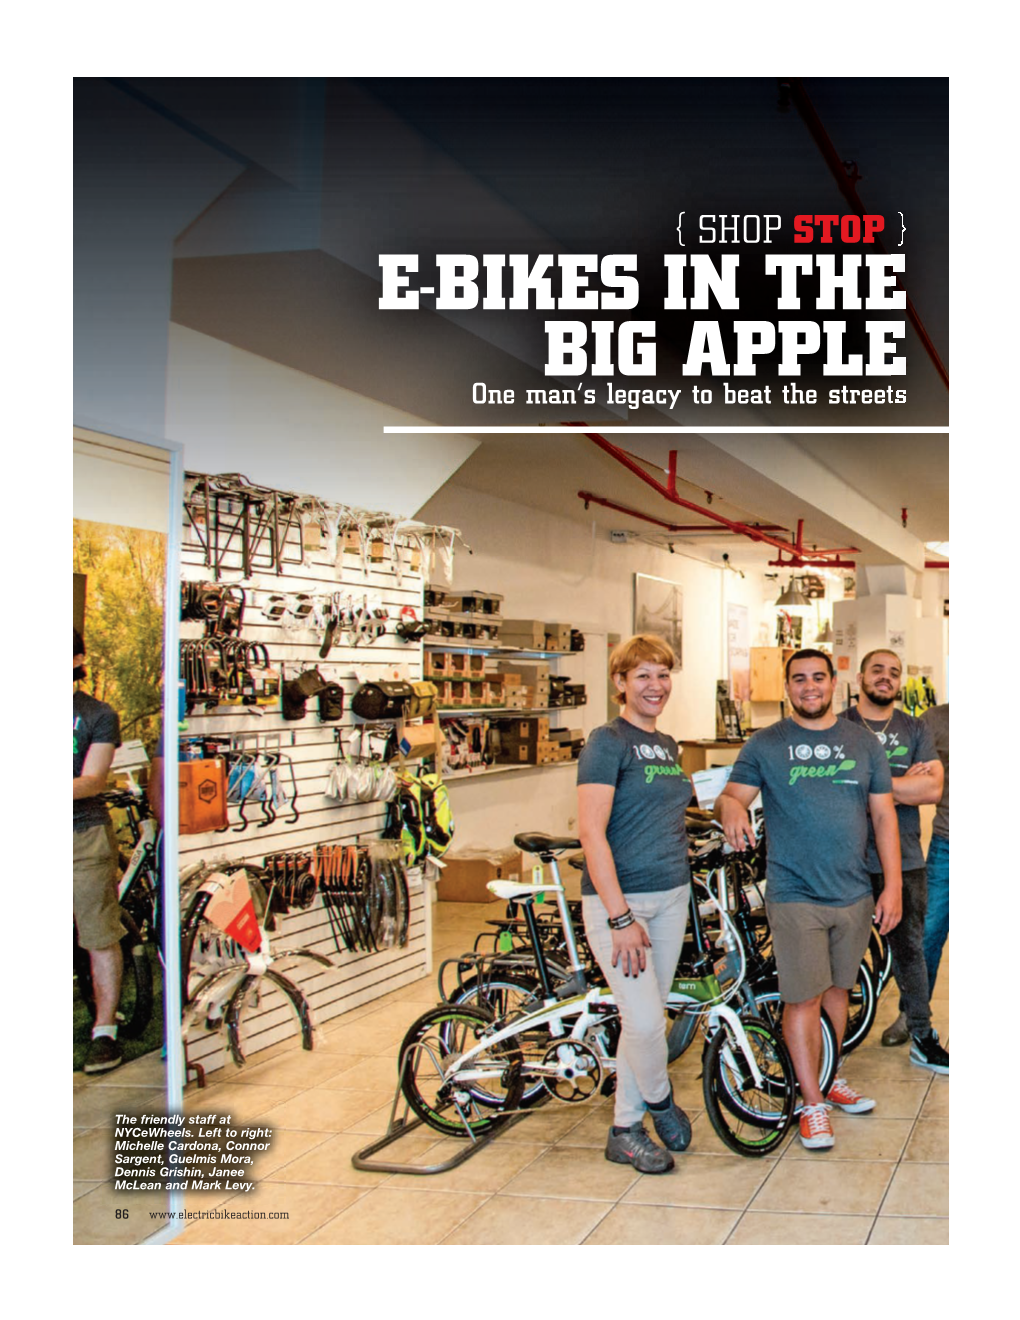 Electric Bike Action Magazine” on the Apple Newsstand, Amazon Kindle Fire App Store Or on Google Play